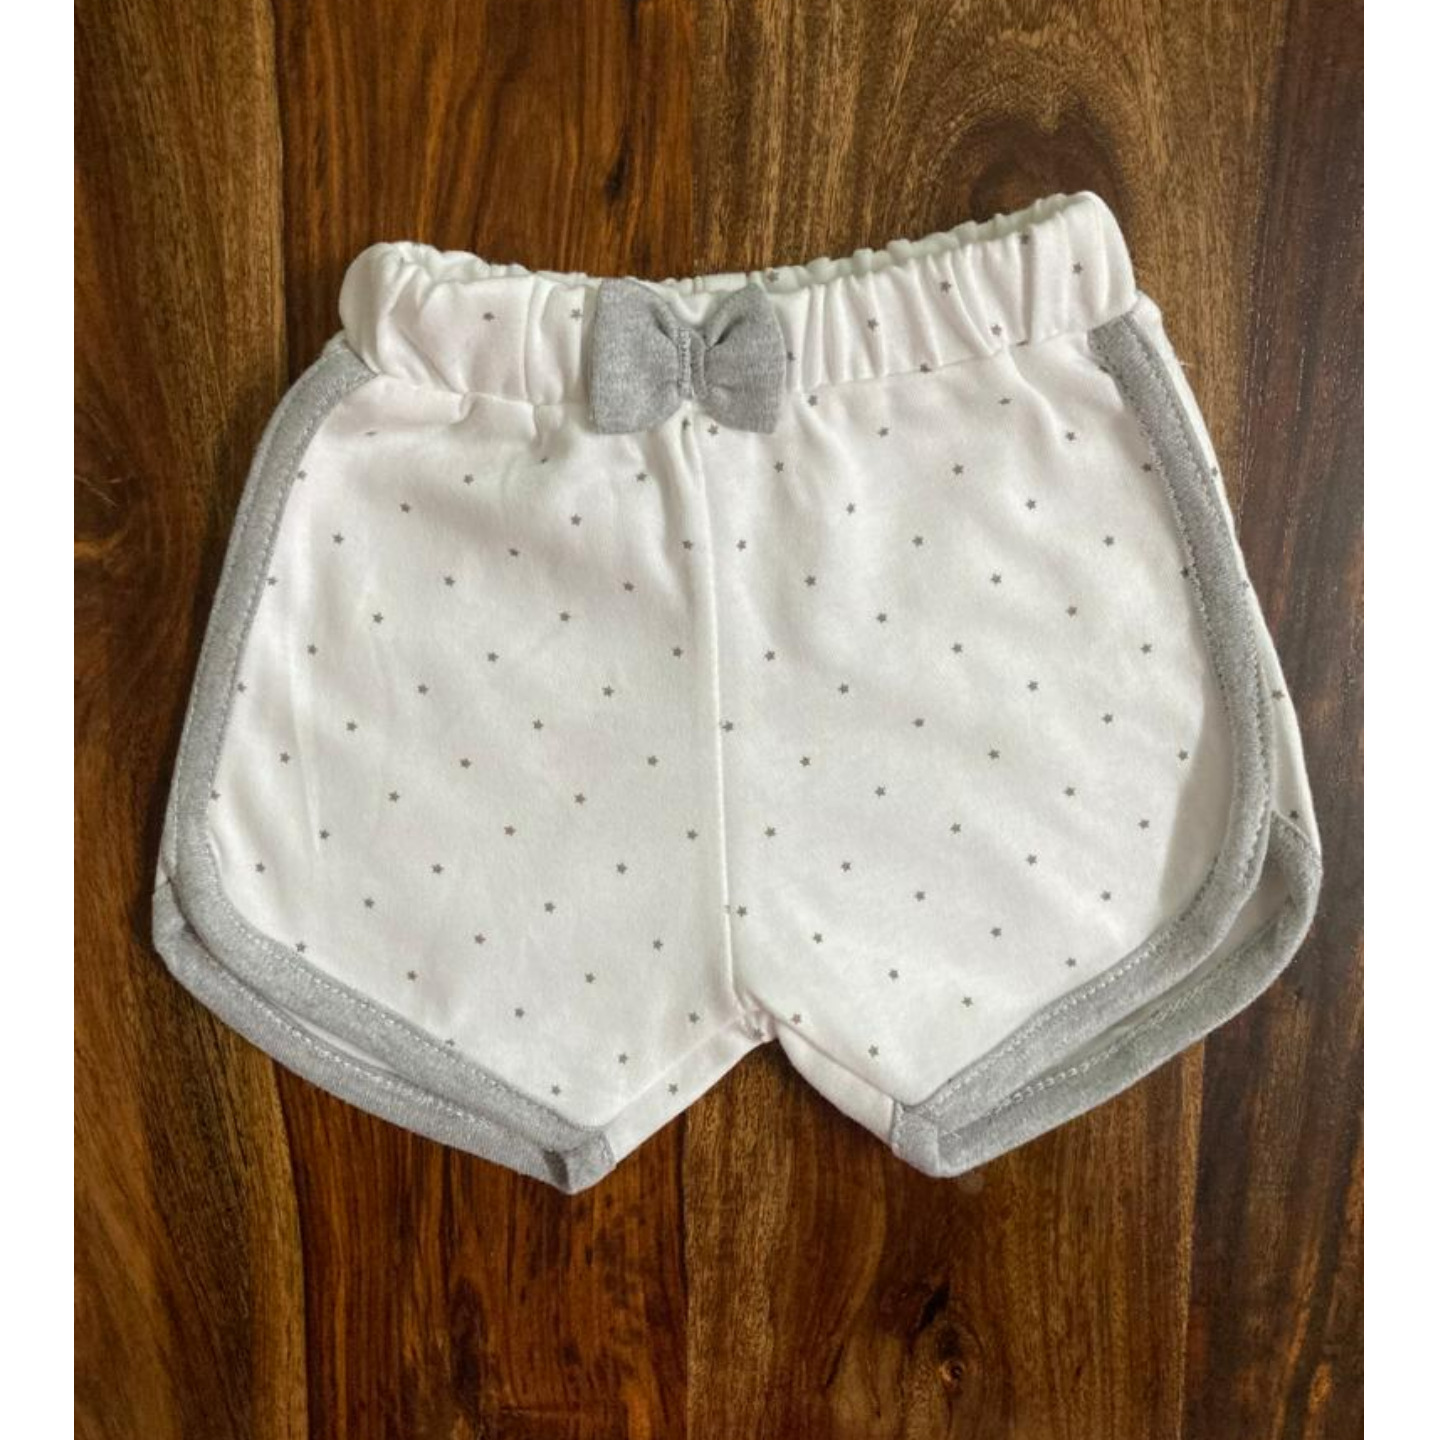 Precious One Bow Shorts Made in India 12 to 18 Months Size